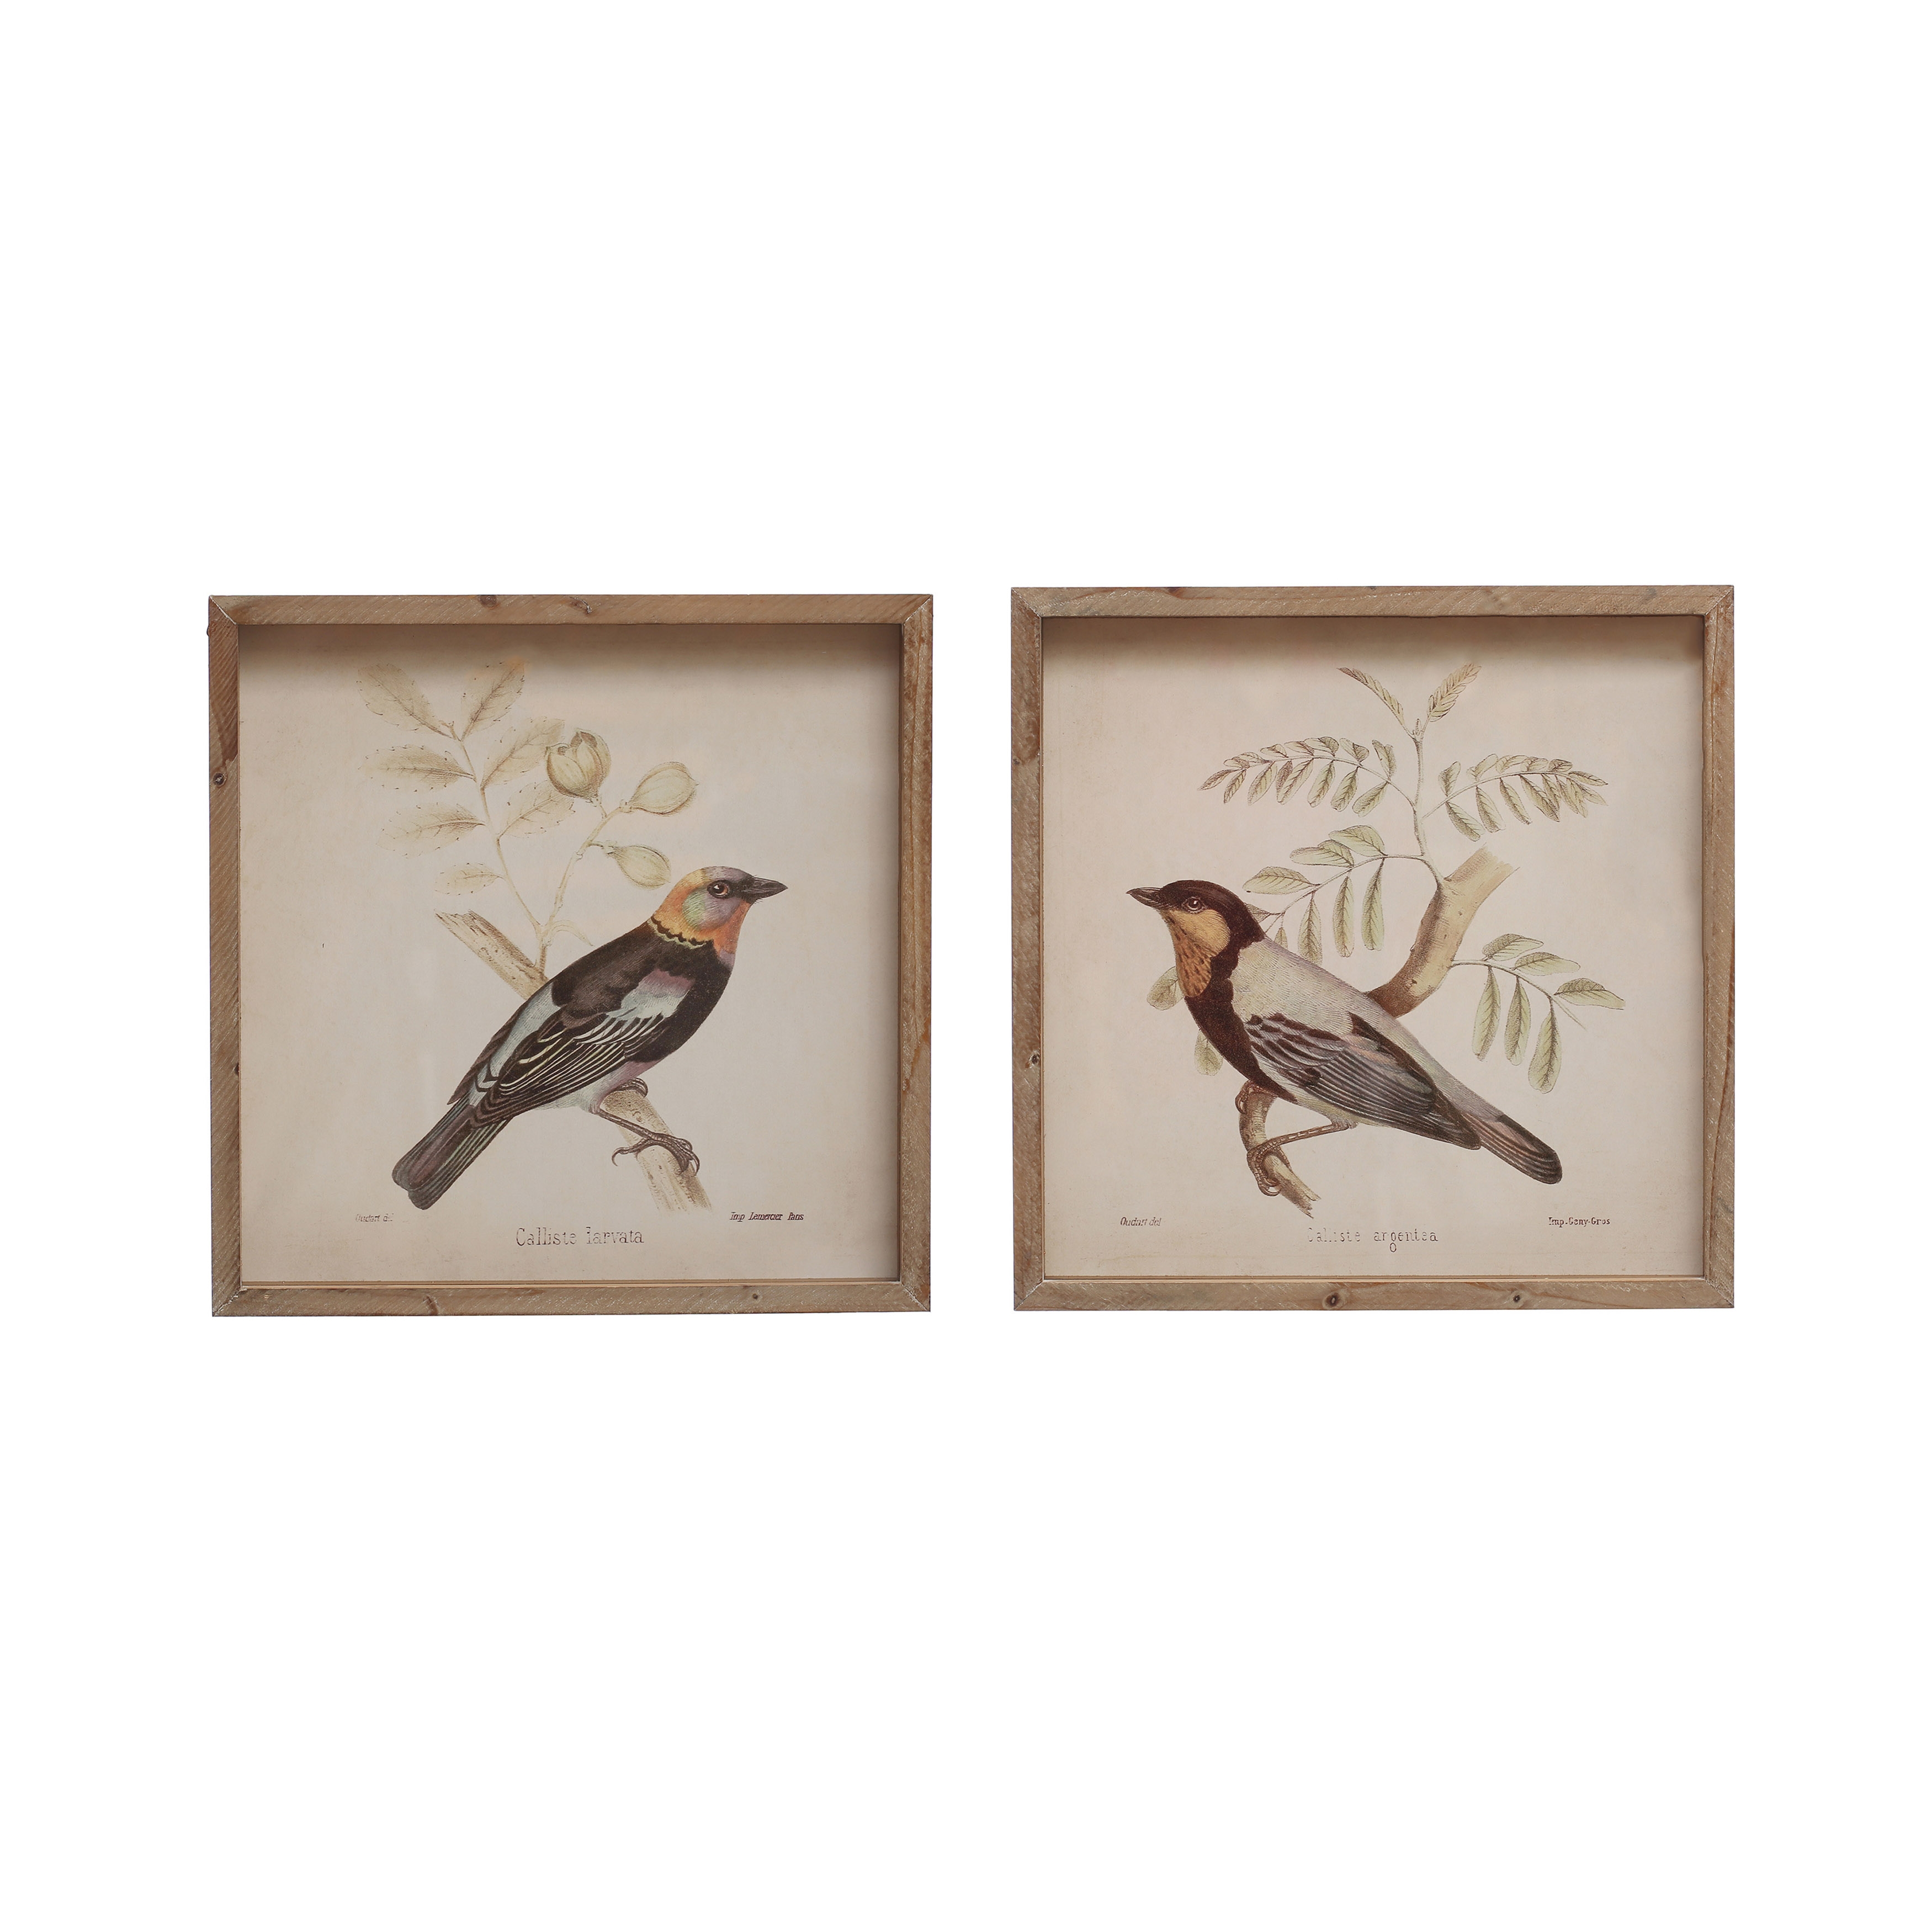 14 Inches Square Wood Framed Glass Wall Décor with Bird Designs, Multicolor, Set of 2 - Image 0